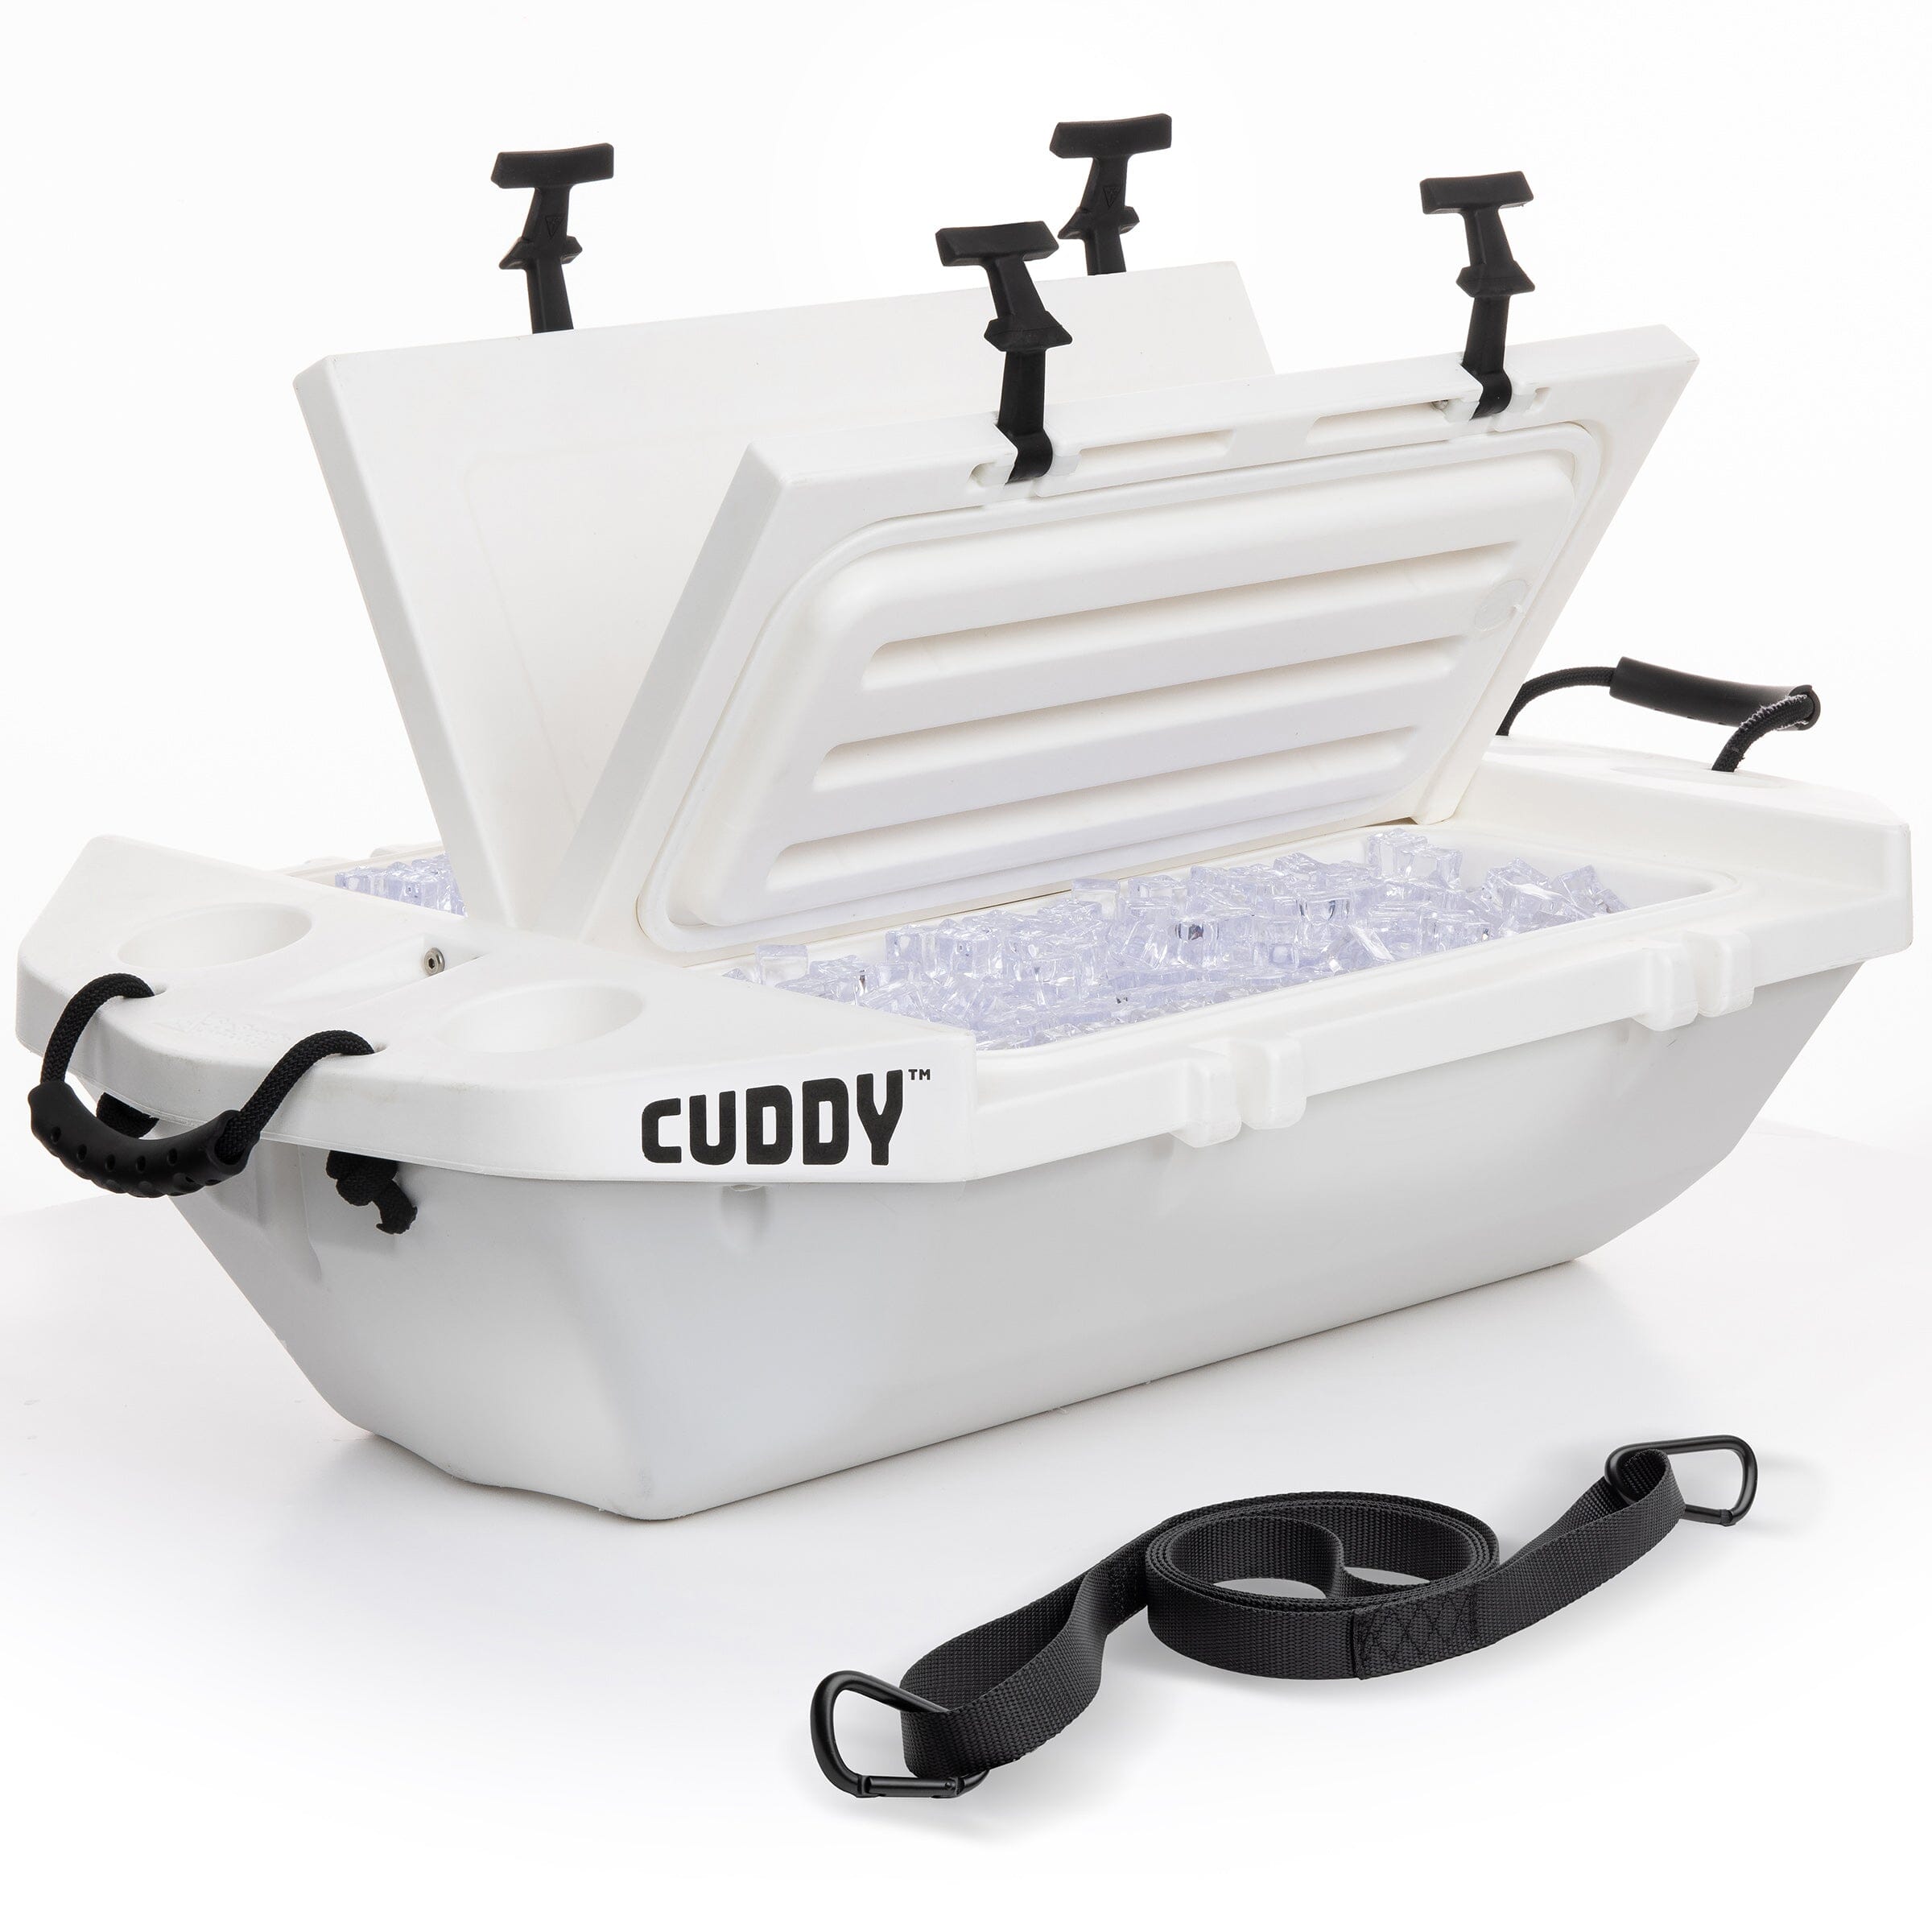 Cuddy Floating Cooler and Dry Storage Vessel - 40QT - Amphibious